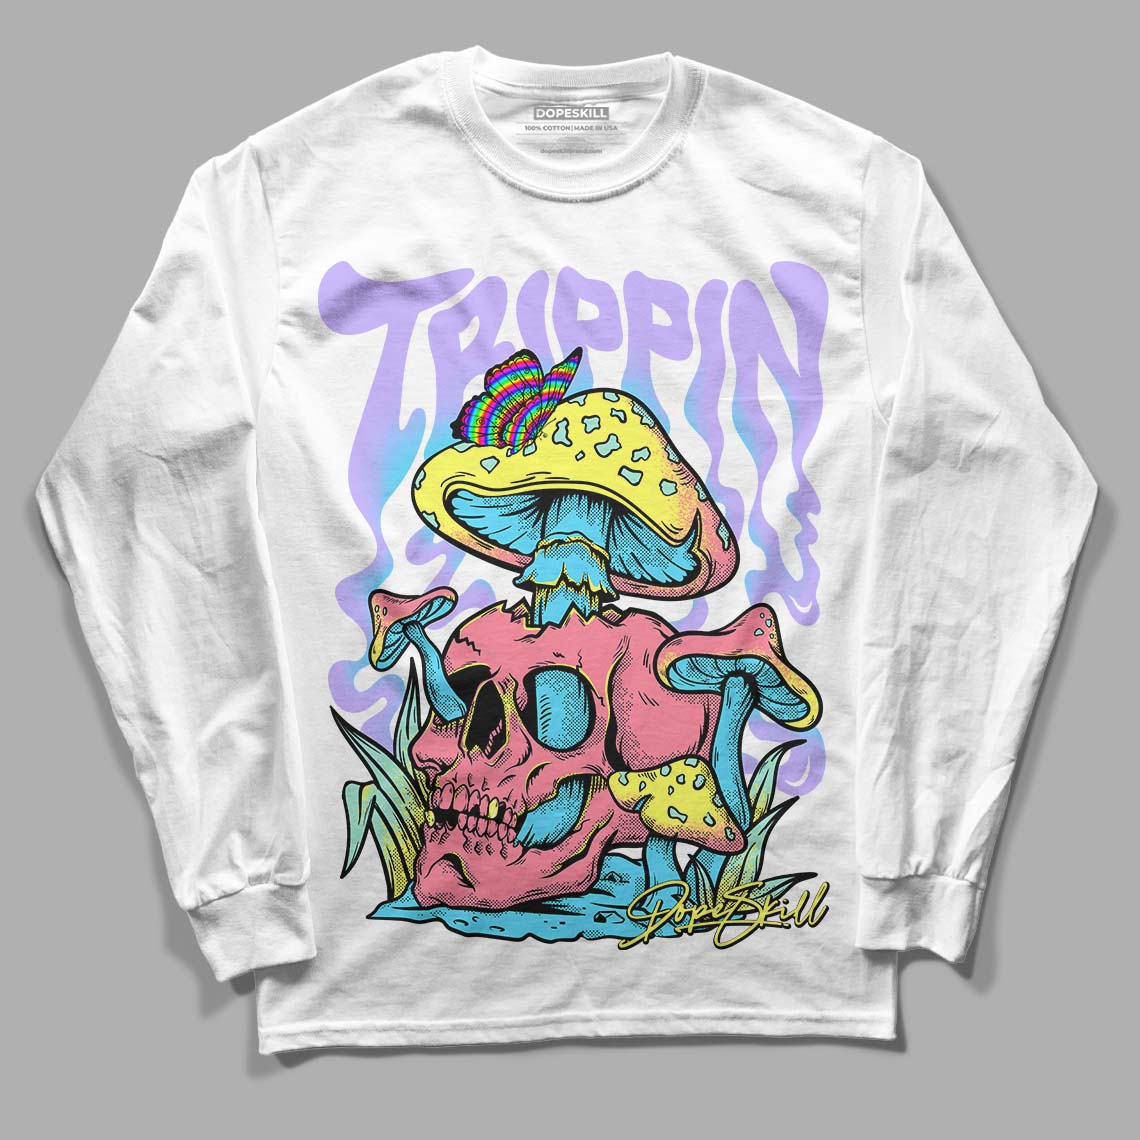 Candy Easter Dunk Low DopeSkill Long Sleeve T-Shirt Trippin Graphic - White 